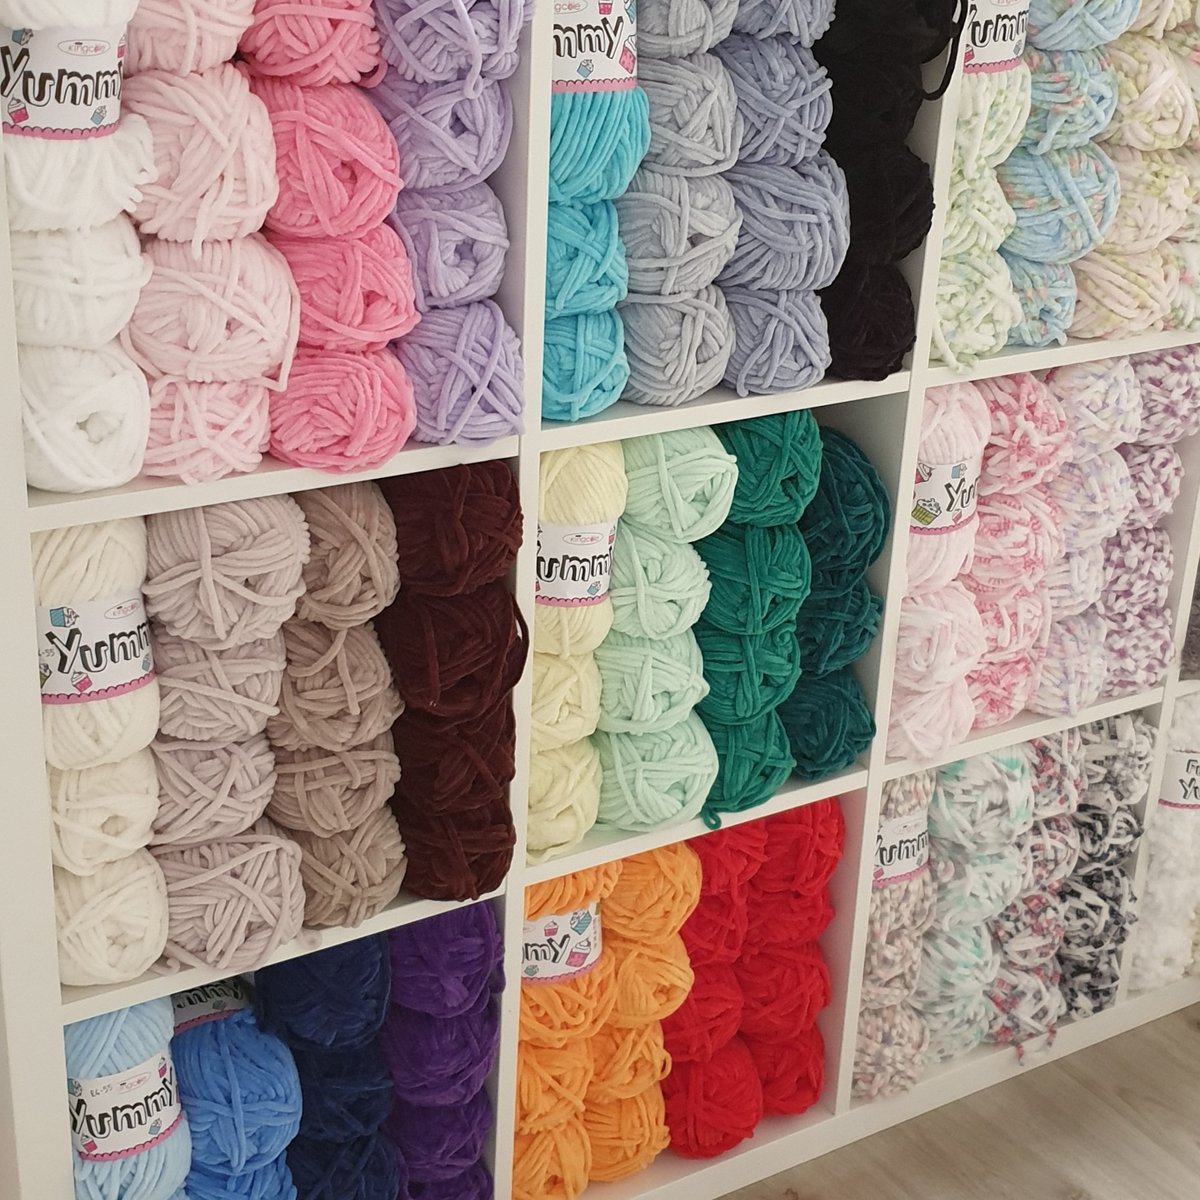 New colours of 'Yummy' yarn in stock and they are scrumptious 😁 Perfect for cosy and cute knitting and crochet projects. nimblethimbles.co.uk #NimbleThimblesSwindon #wiltshire #yummyyarn #kingcole #loveknitting #lovecrochet #SupportSmallBusiness